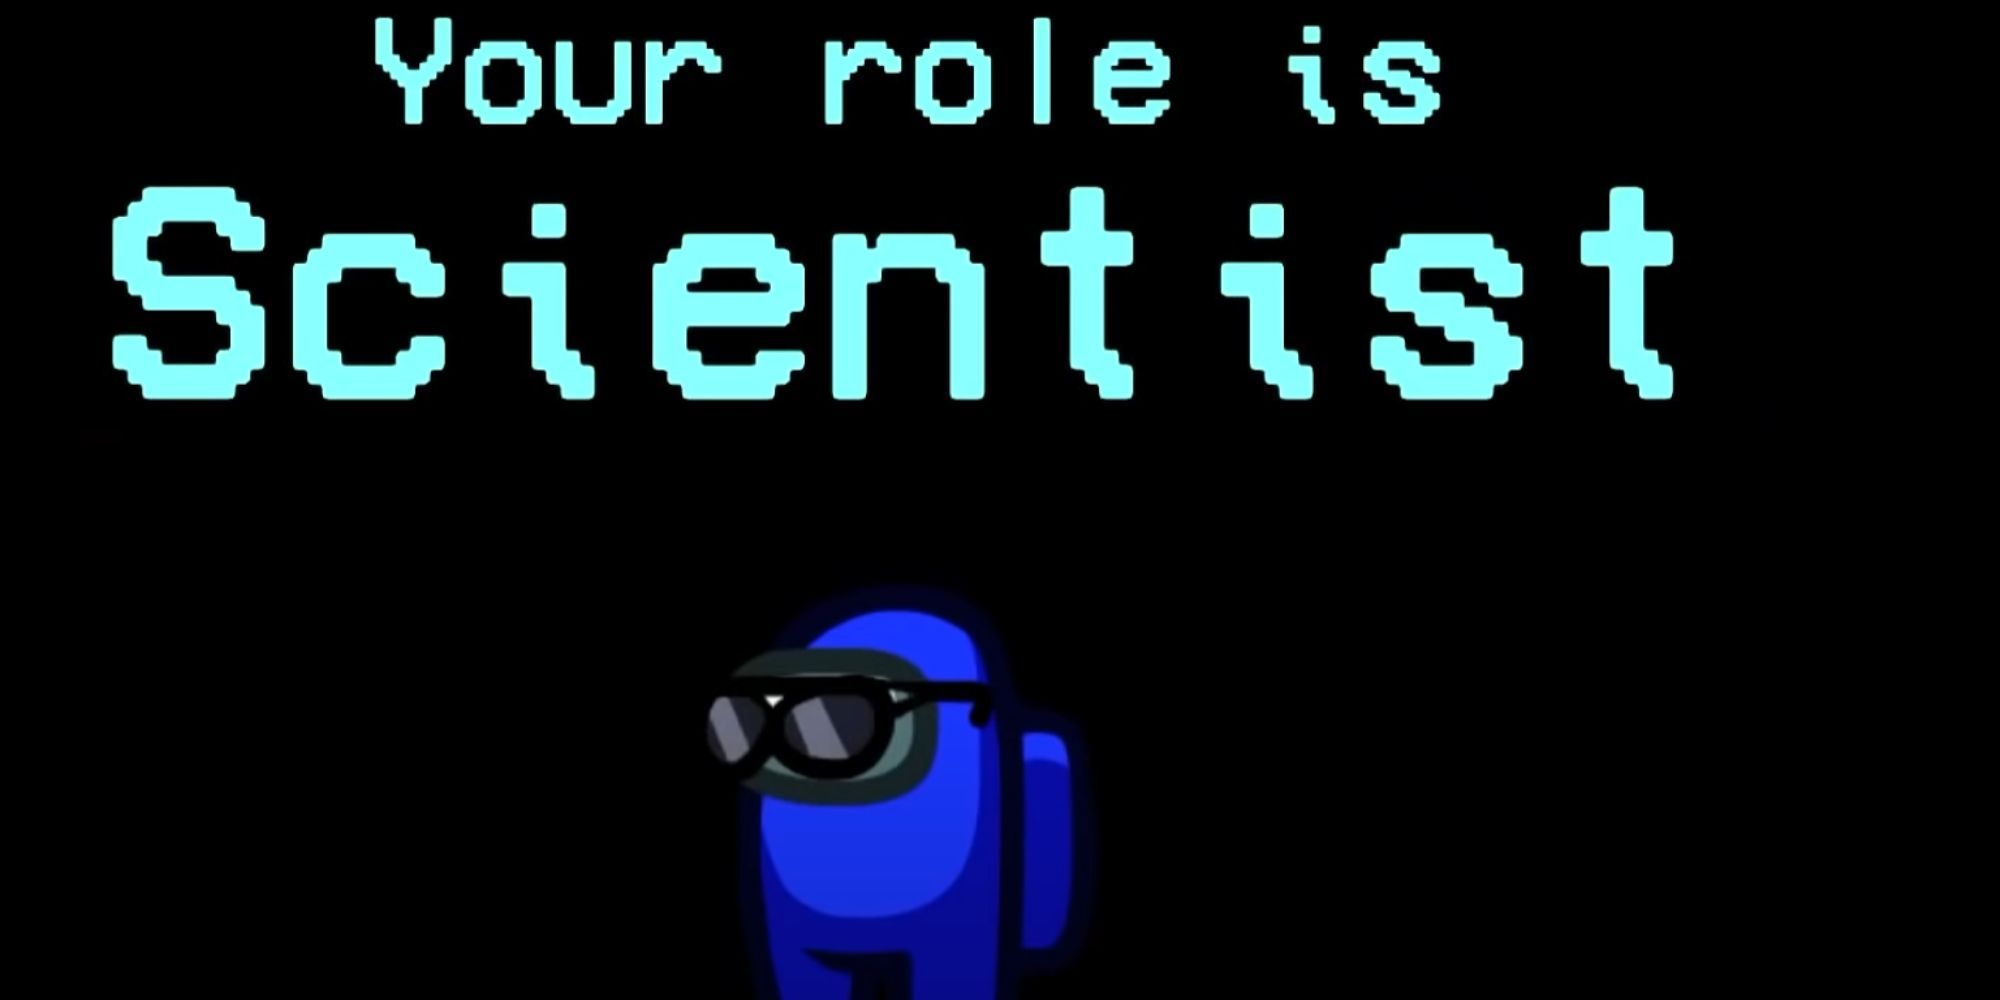 among_us_scientist_role_starting_screen_menu